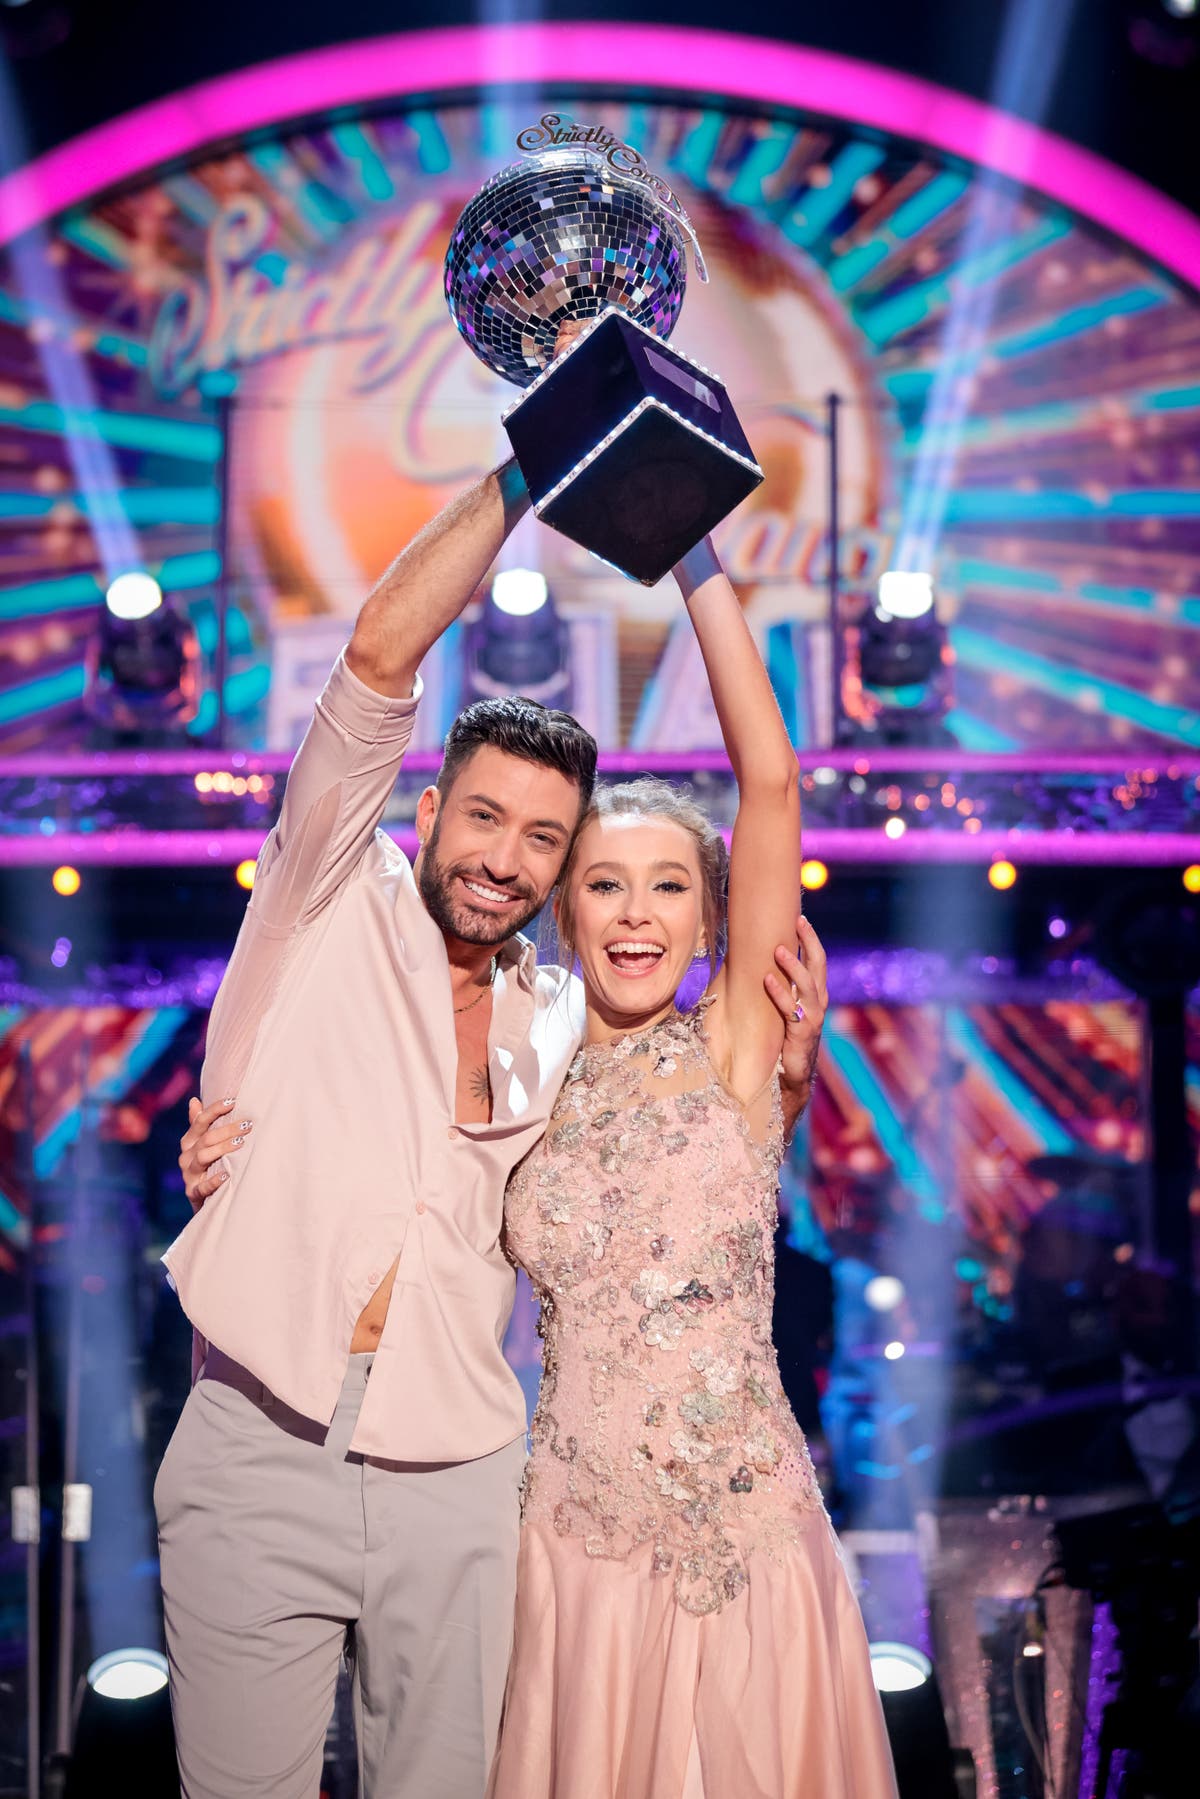 Rose Ayling-Ellis makes history with Strictly Come Dancing win